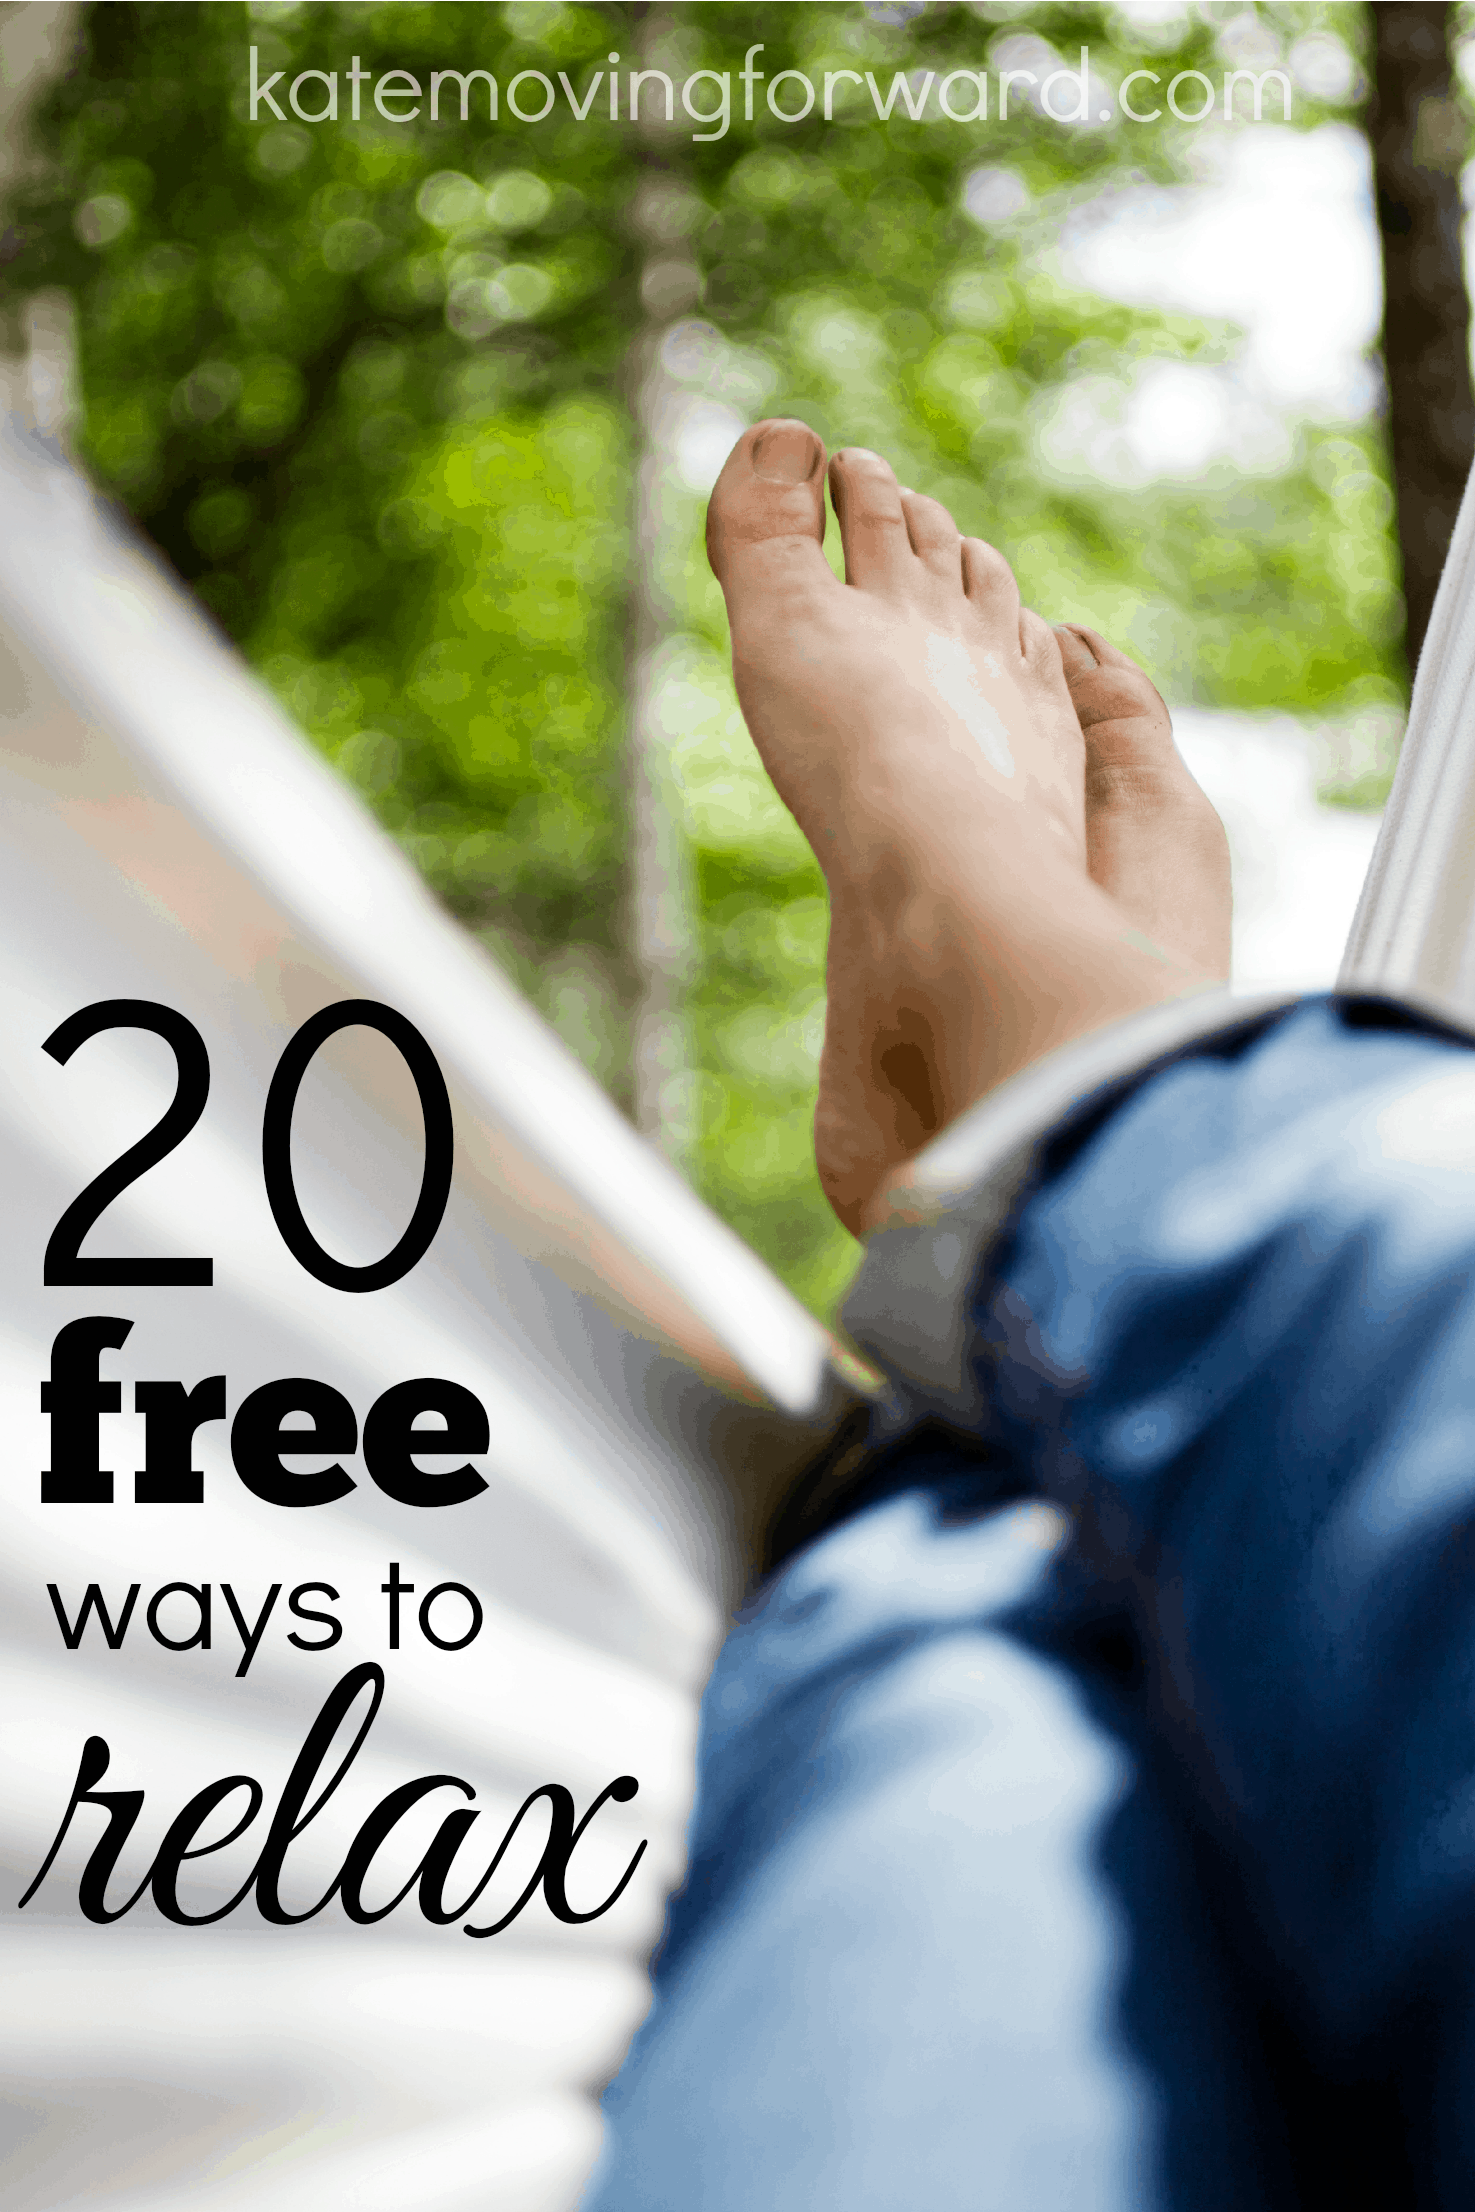 20 free ways to relax